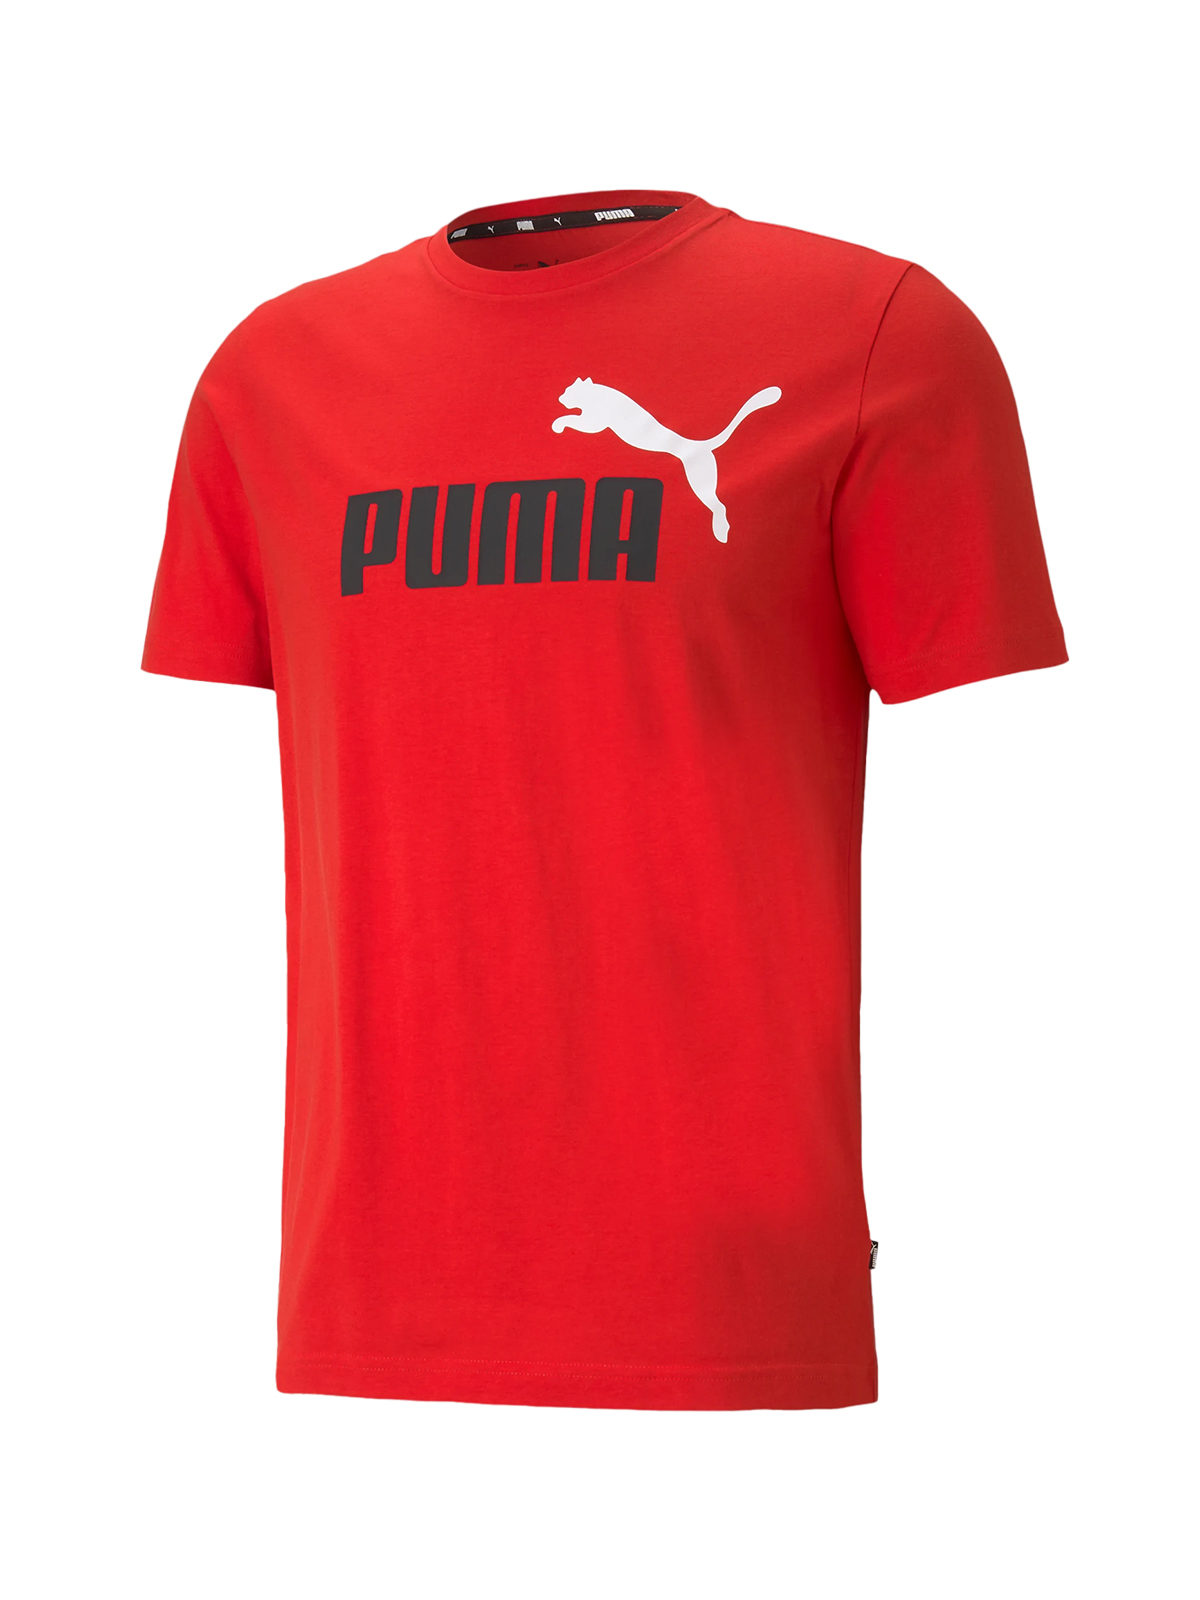 Puma ESS + 2 COL LOGO TEE Men's short sleeve T-shirt: for sale at 20.69€ on